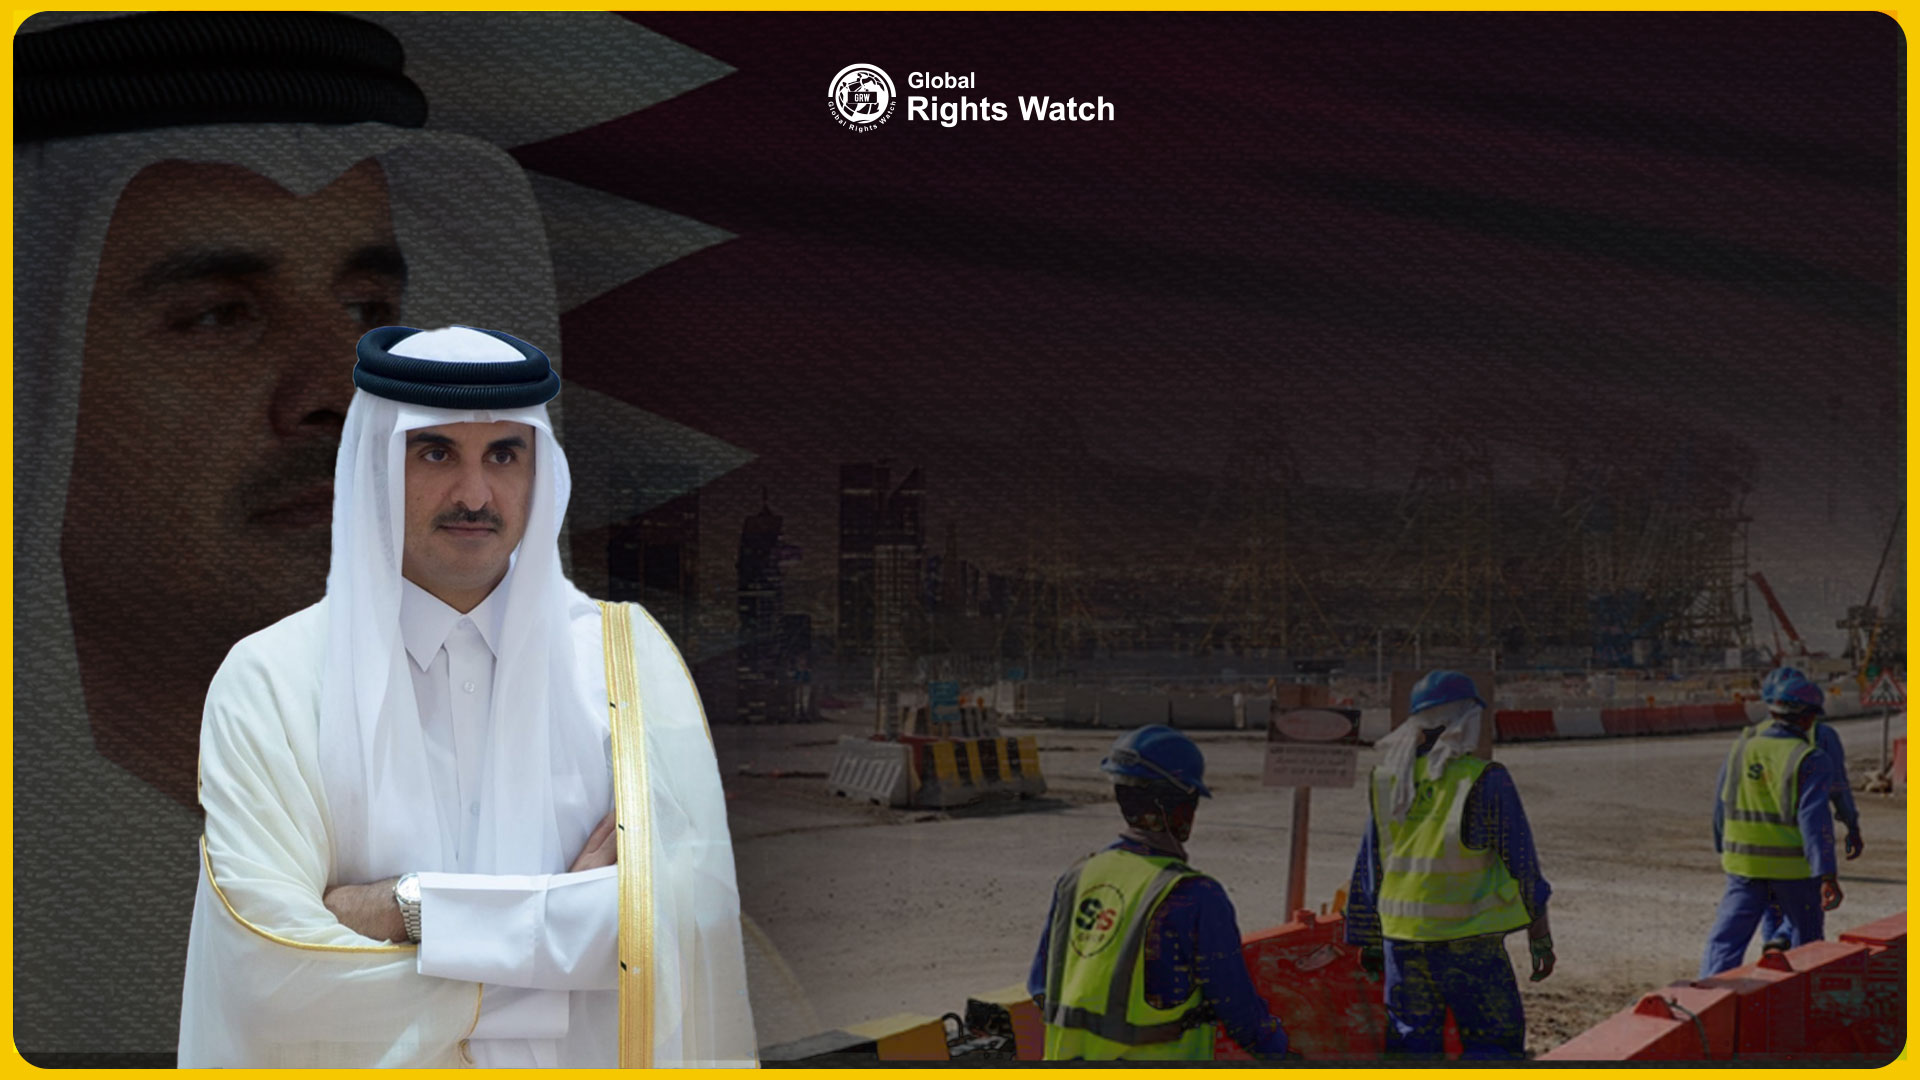 Reform Efforts in Qatar Are Not Addressing Human Rights Abuses